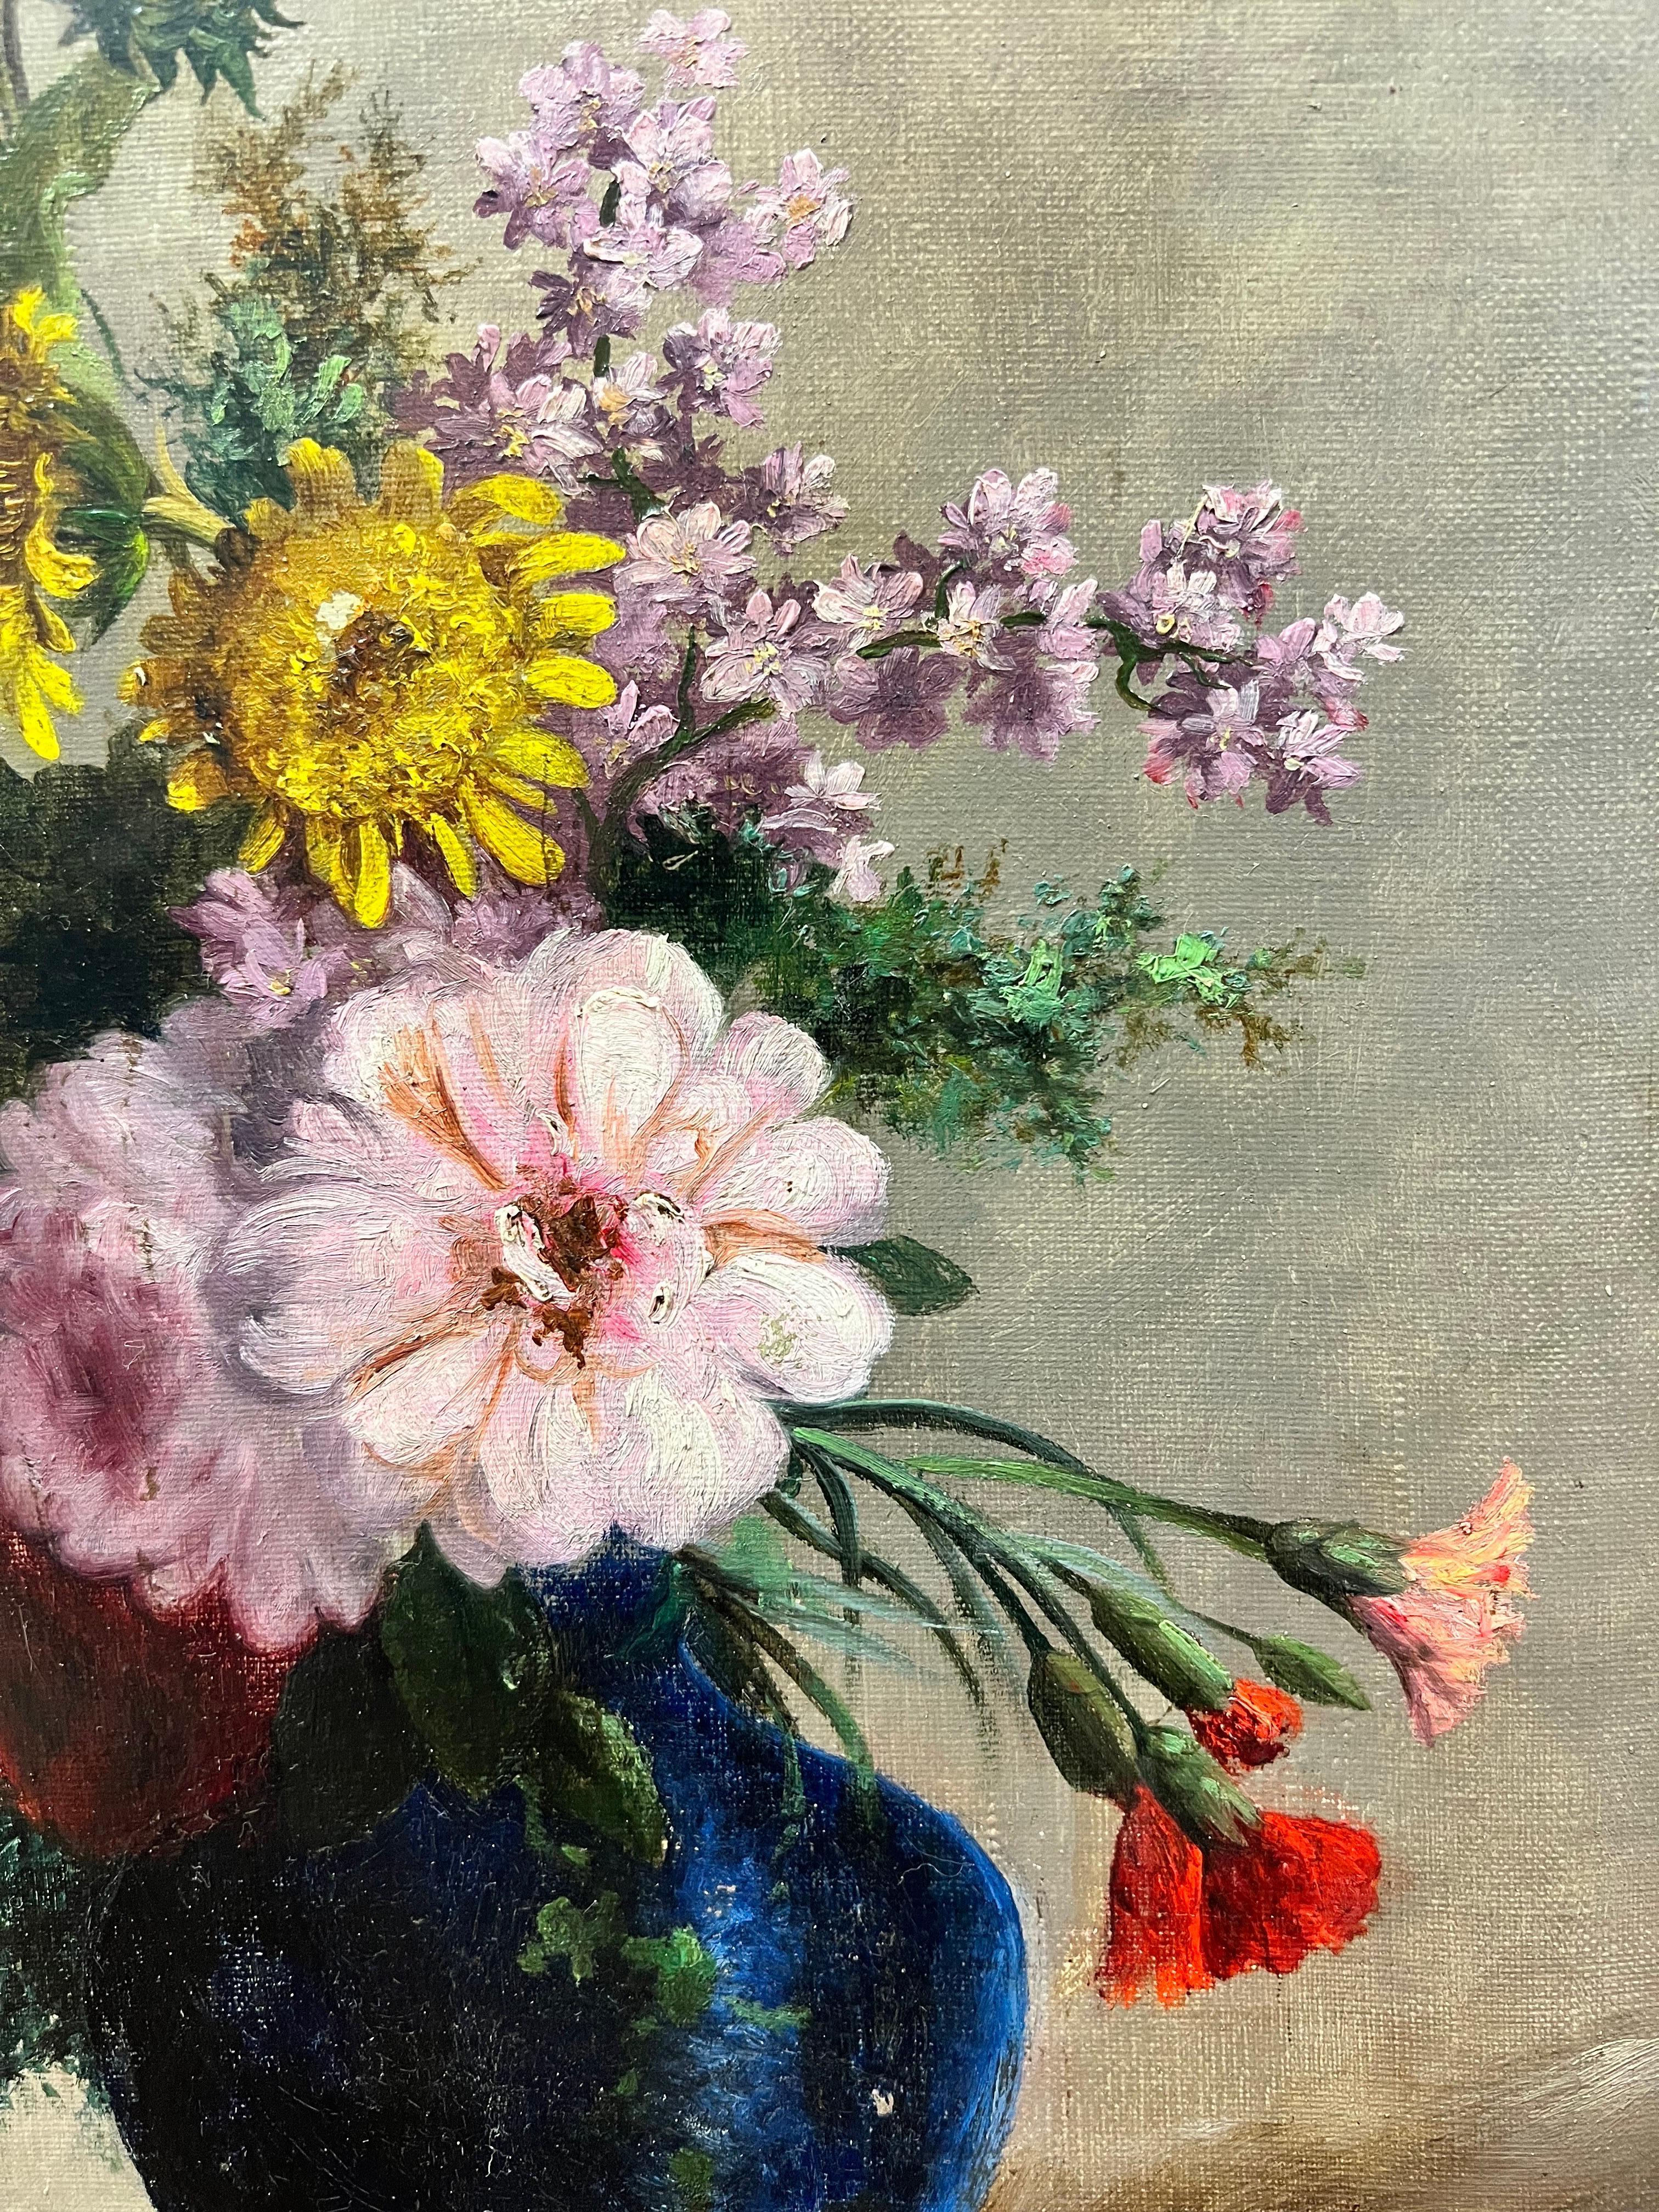 Artist/ School: French School, late 19th century/early 20th century, signed by Barthelemy

Title: Profusion of flowers in a deep blue vase. 

Medium: oil on canvas laid over board, unframed 

Board: 15.5 x 13 inches

Provenance: private collection,